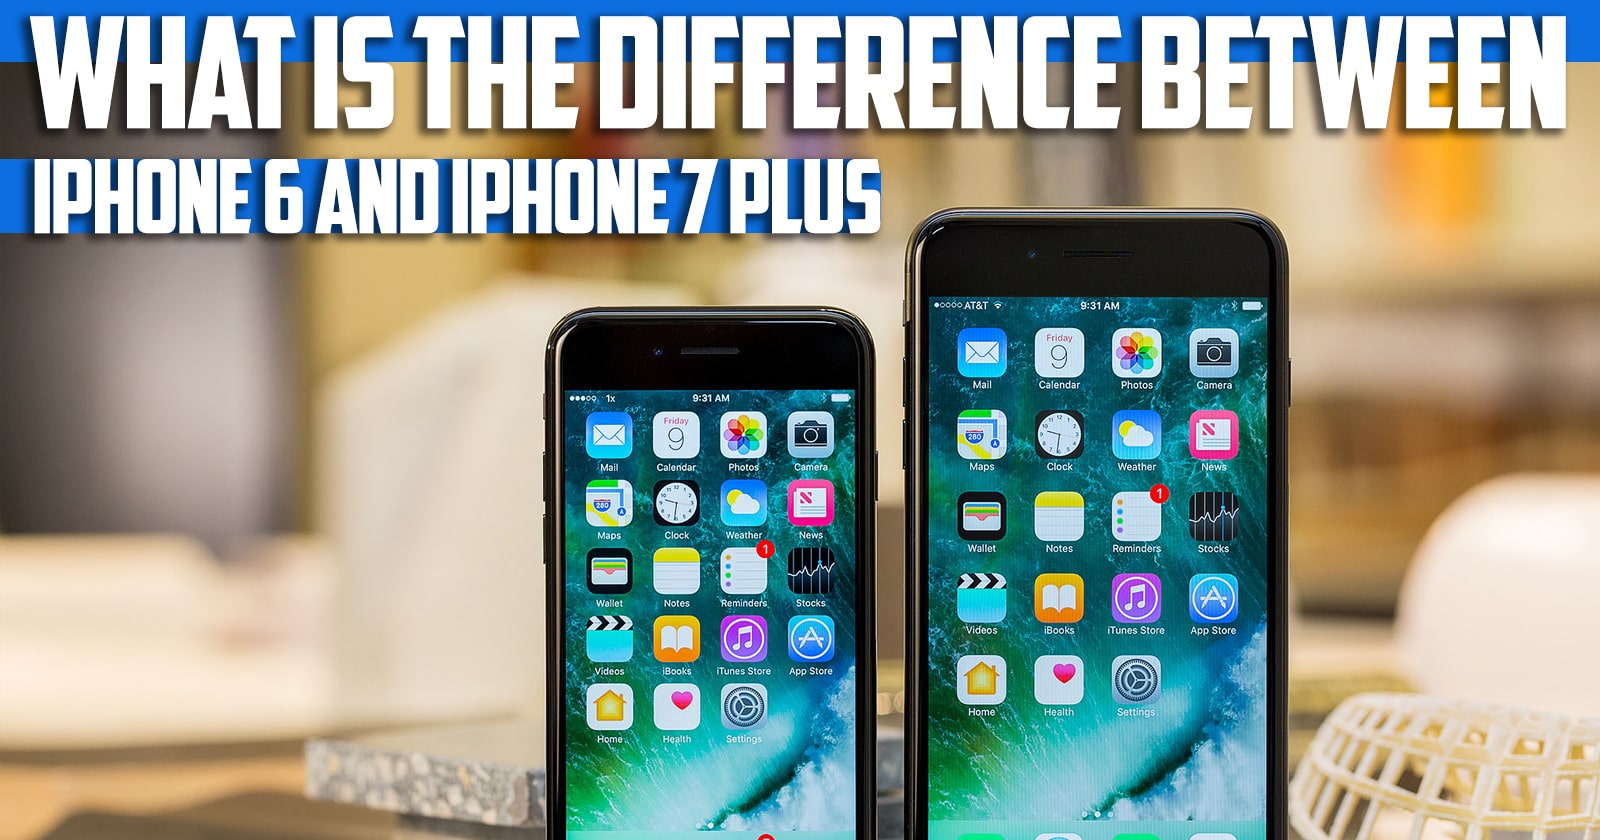 What is the difference between iPhone 6 and iPhone 7 plus?